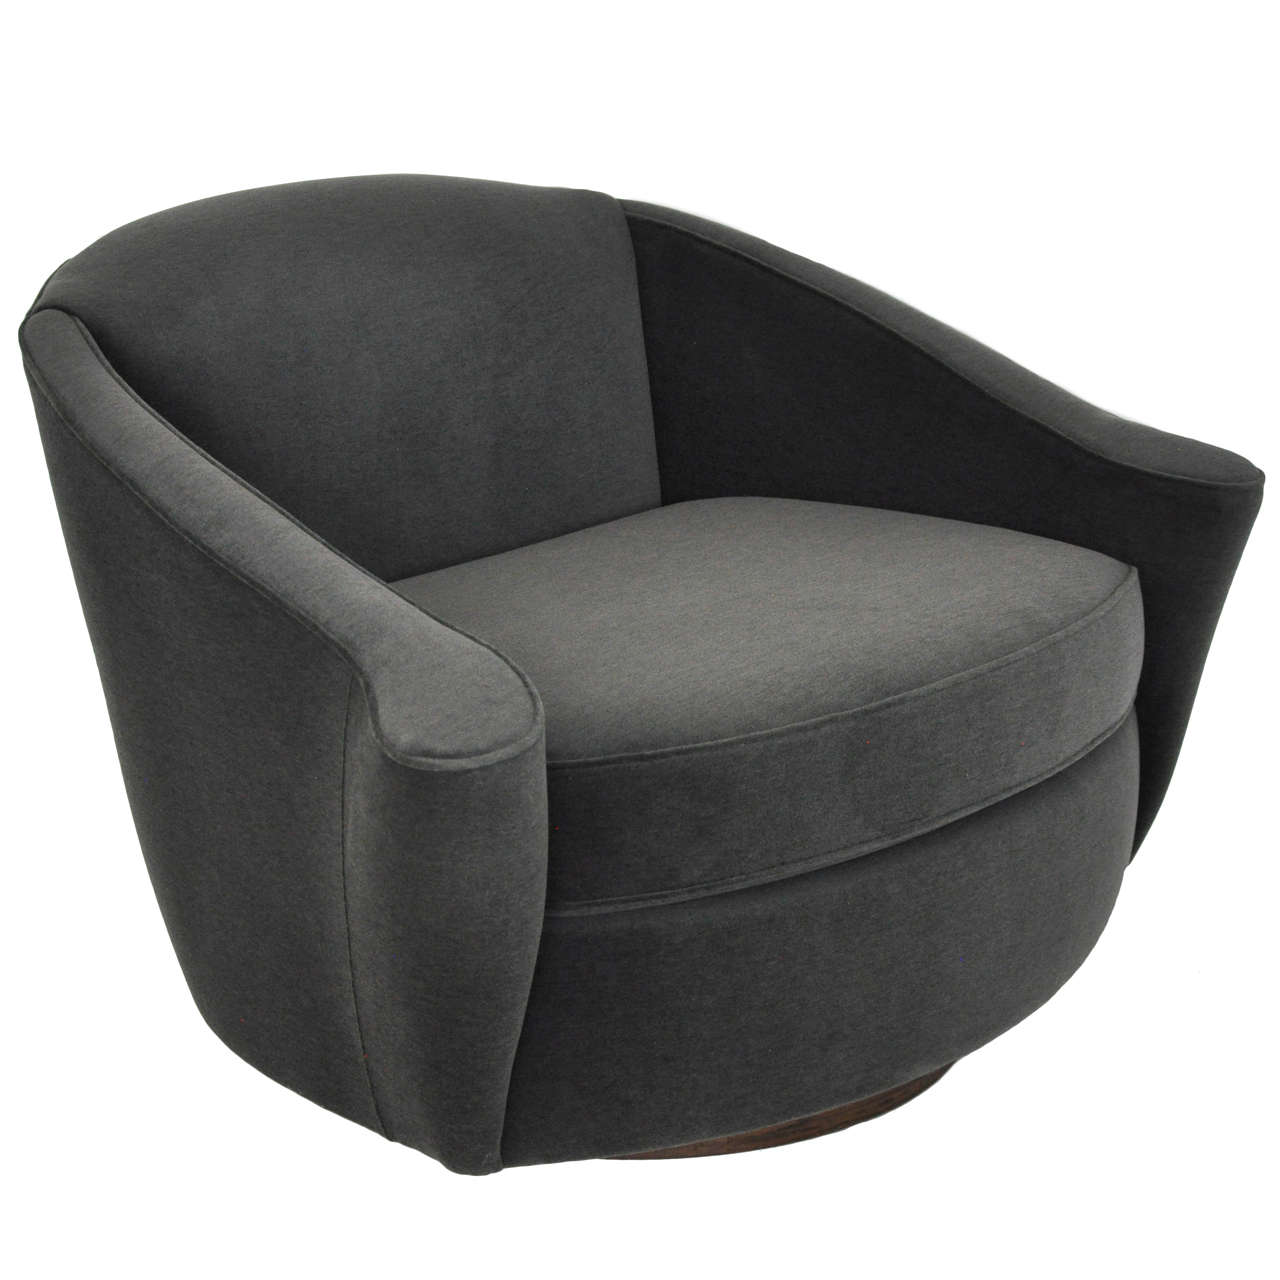 Large Milo Baughman Swivel Chair with Ottoman at 1stdibs